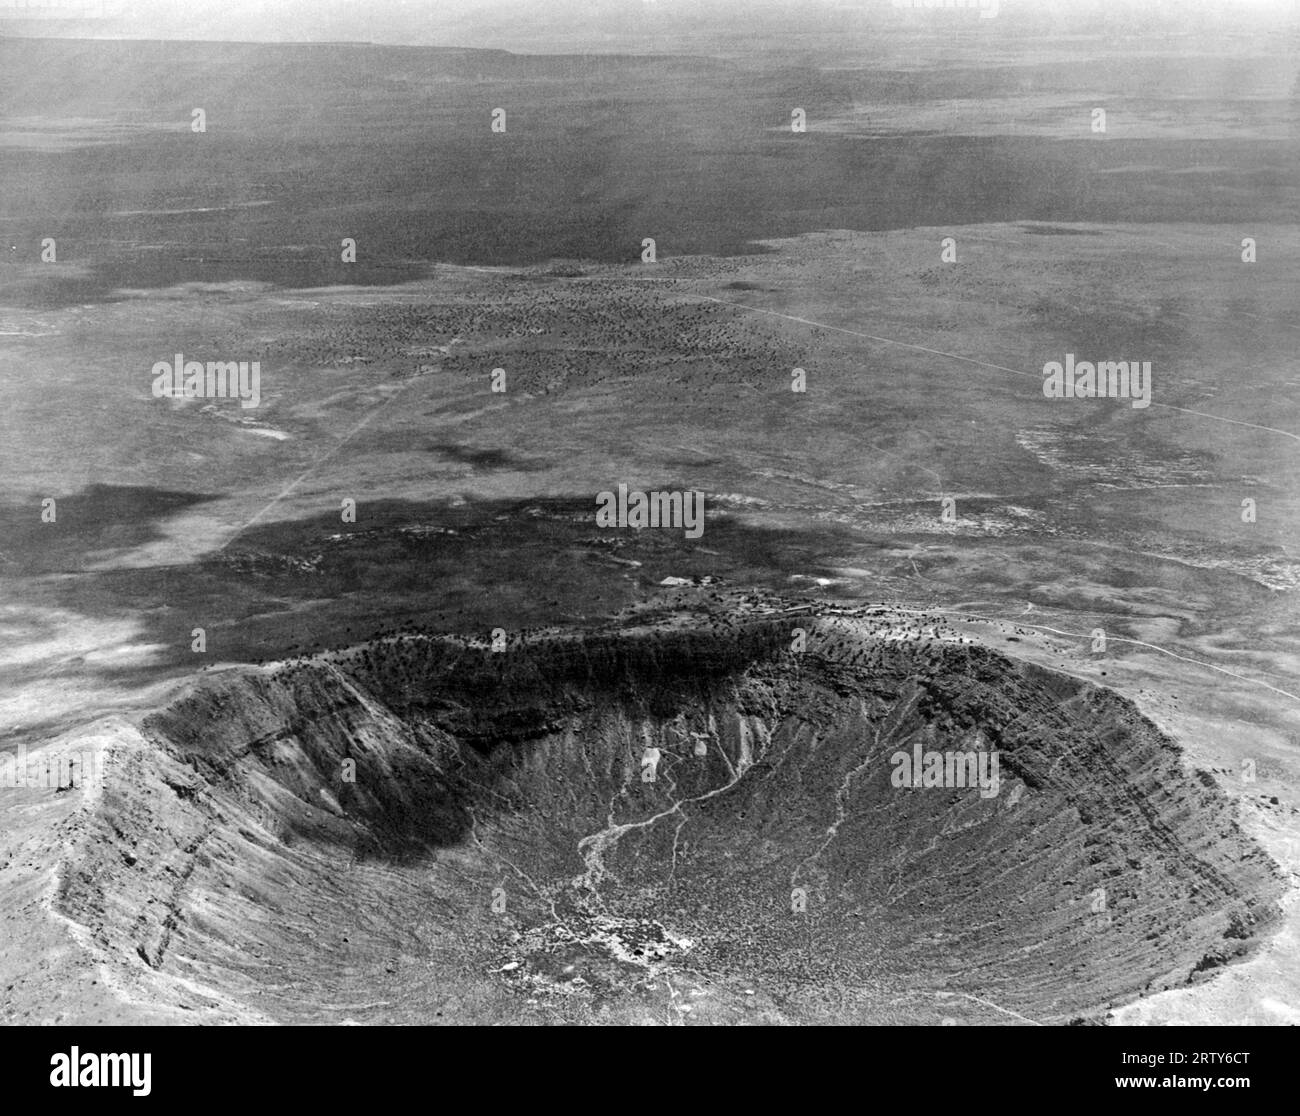 Winslow, Arizona  c. 1935  An aerial view of the Meteor Crater, caused by a meteor hitting there 200 years ago. The dark area is from a passing cloud. Stock Photo